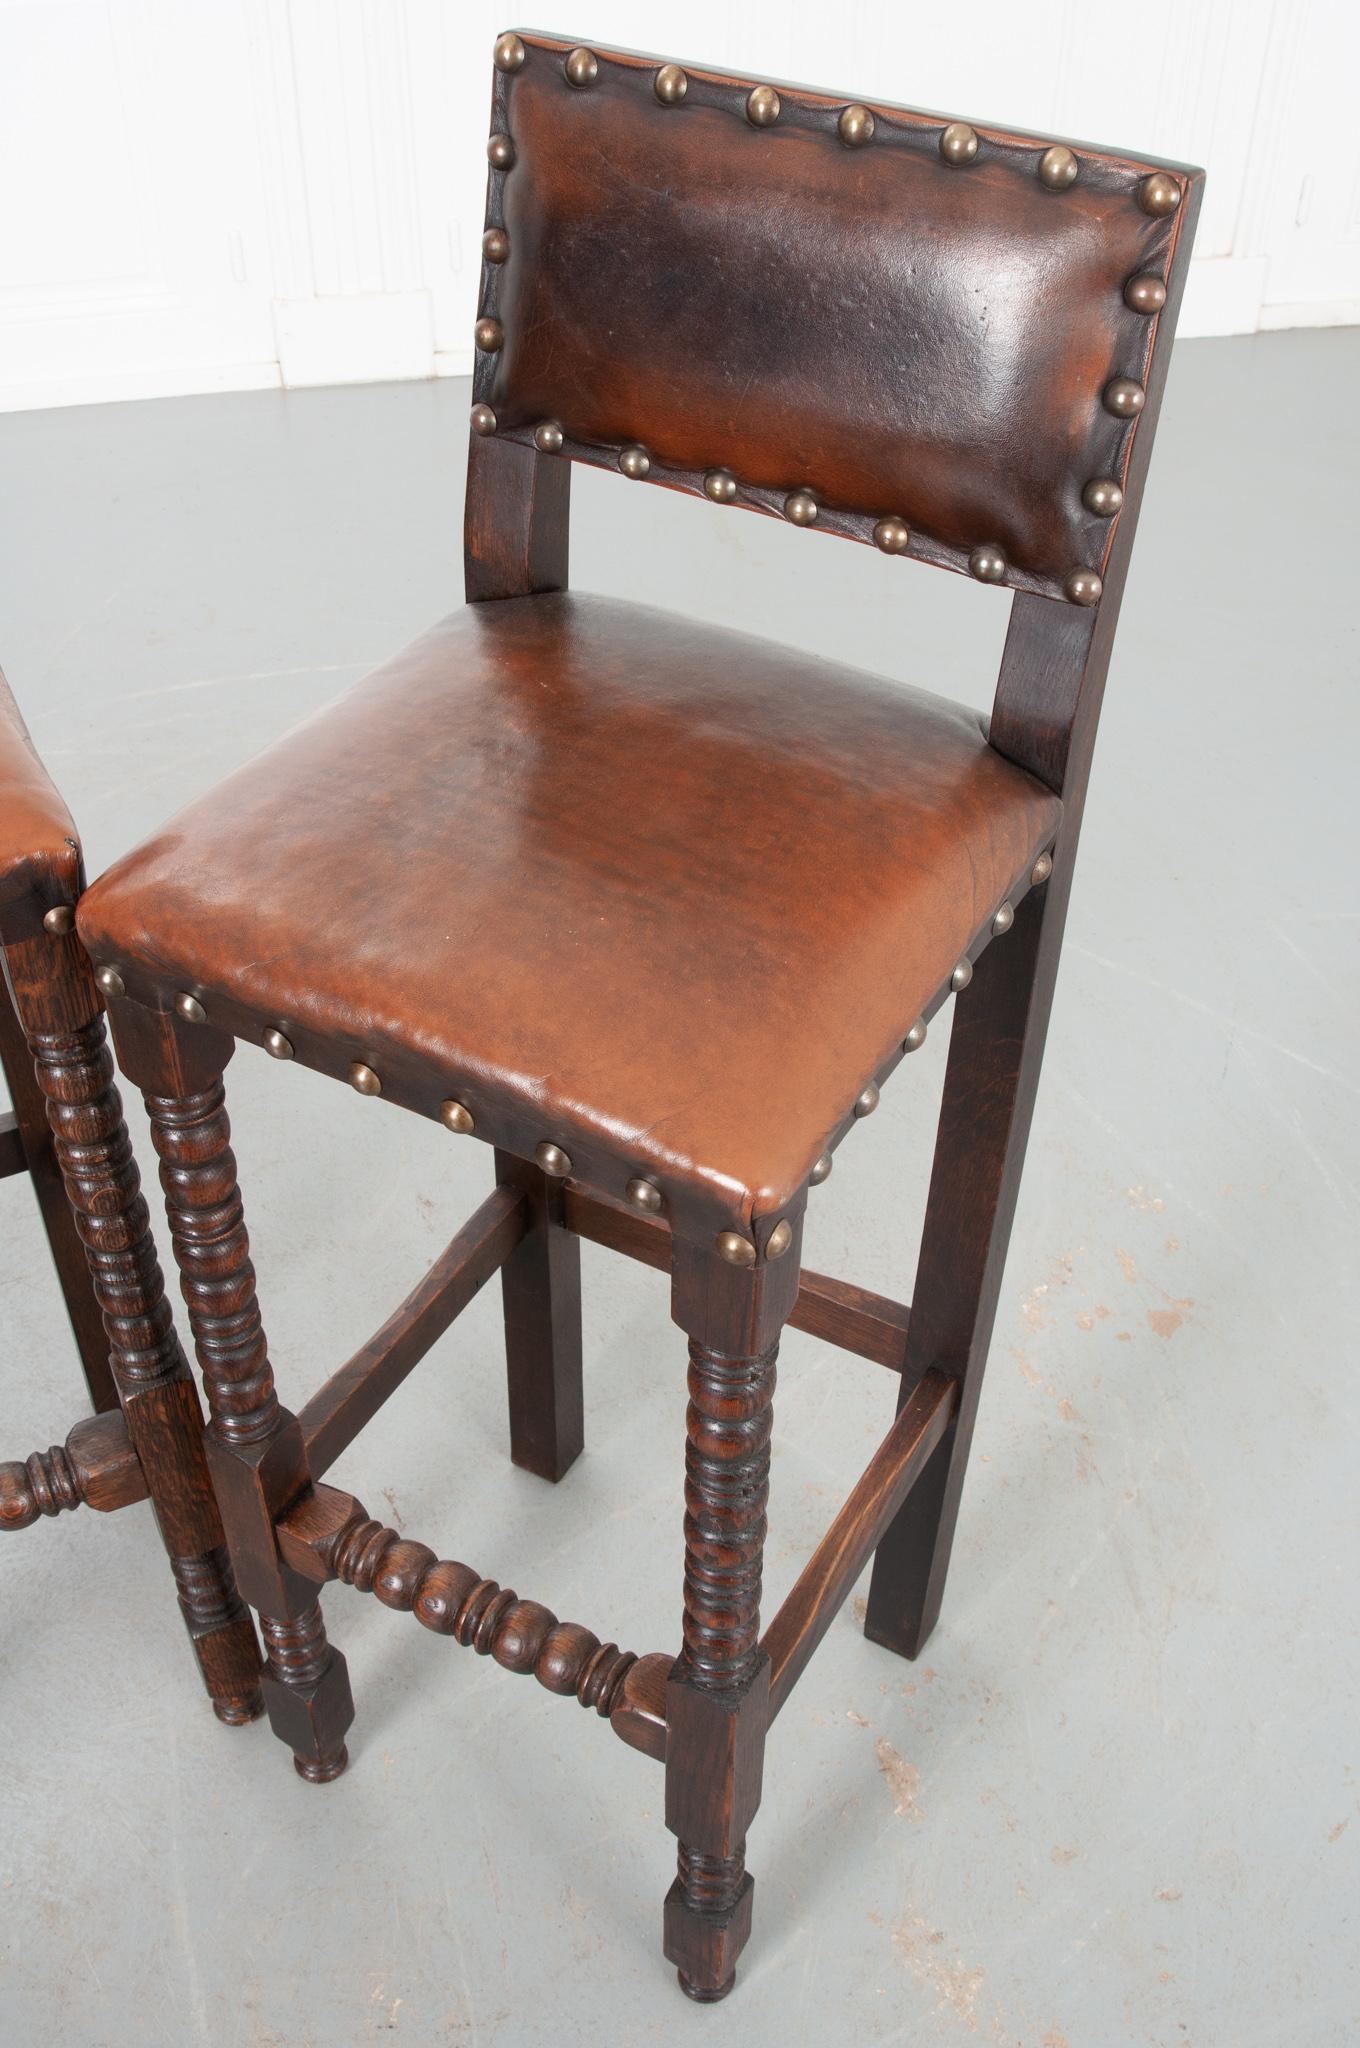 Hand-Crafted English 19th Century Oak & Leather Pub Chairs